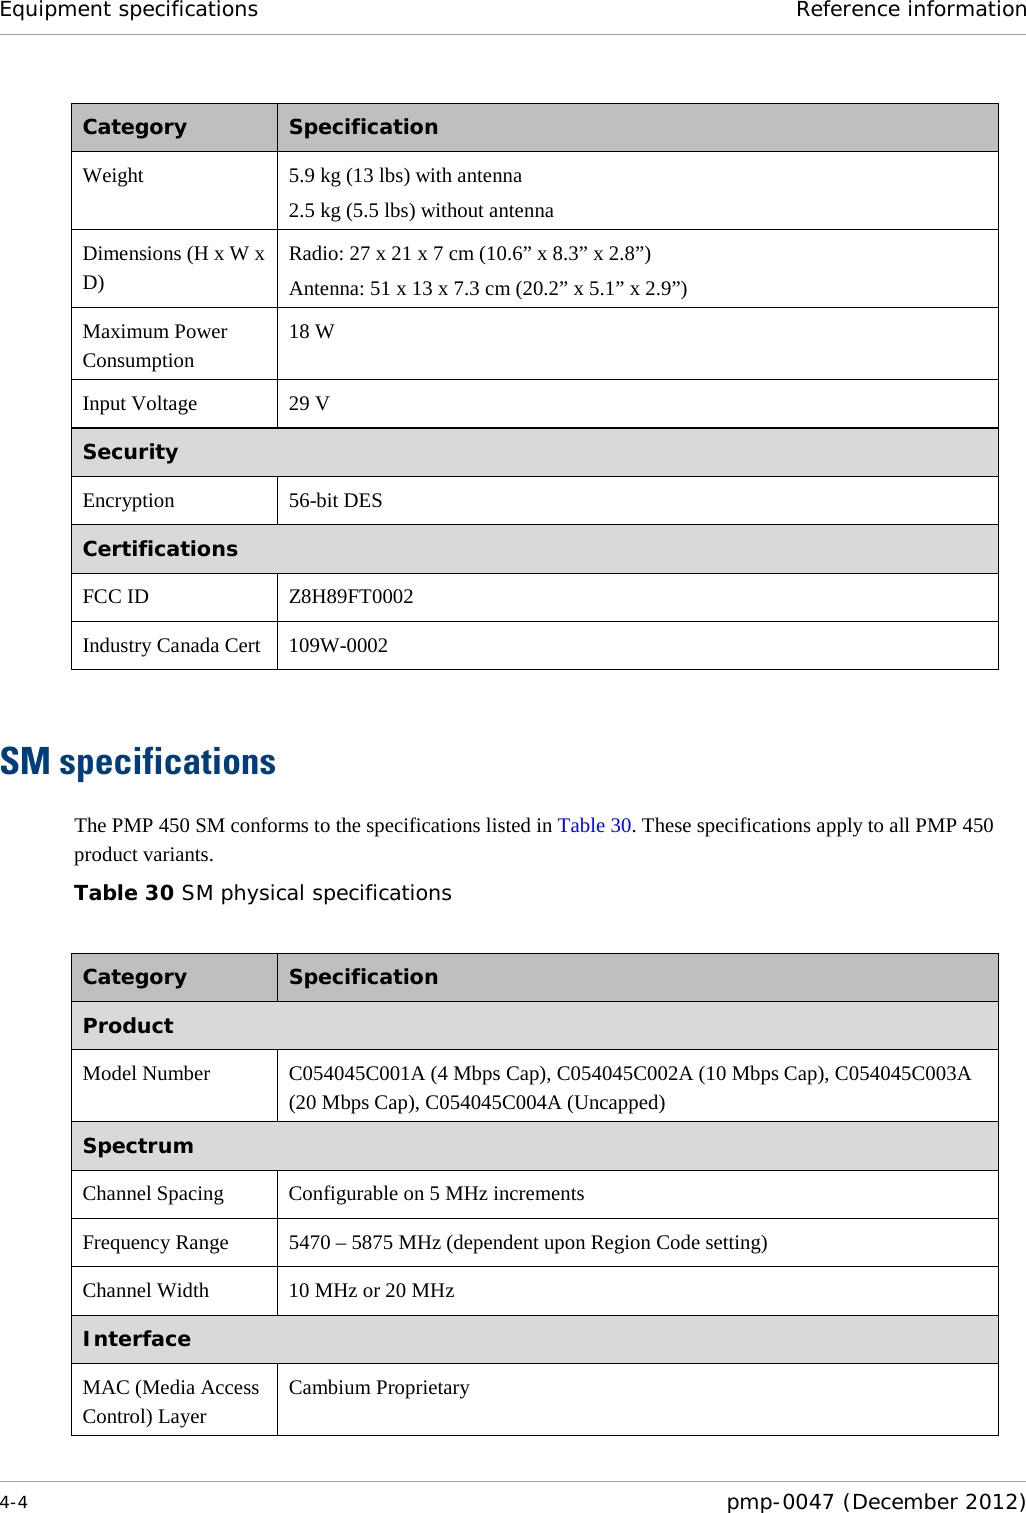 Equipment specifications Reference information  4-4  pmp-0047 (December 2012)  Category  Specification Weight 5.9 kg (13 lbs) with antenna 2.5 kg (5.5 lbs) without antenna Dimensions (H x W x D) Radio: 27 x 21 x 7 cm (10.6” x 8.3” x 2.8”) Antenna: 51 x 13 x 7.3 cm (20.2” x 5.1” x 2.9”) Maximum Power Consumption 18 W Input Voltage 29 V Security Encryption 56-bit DES Certifications FCC ID Z8H89FT0002 Industry Canada Cert 109W-0002  SM specifications The PMP 450 SM conforms to the specifications listed in Table 30. These specifications apply to all PMP 450 product variants. Table 30 SM physical specifications  Category  Specification Product Model Number C054045C001A (4 Mbps Cap), C054045C002A (10 Mbps Cap), C054045C003A (20 Mbps Cap), C054045C004A (Uncapped) Spectrum Channel Spacing Configurable on 5 MHz increments Frequency Range 5470 – 5875 MHz (dependent upon Region Code setting) Channel Width 10 MHz or 20 MHz Interface MAC (Media Access Control) Layer Cambium Proprietary 